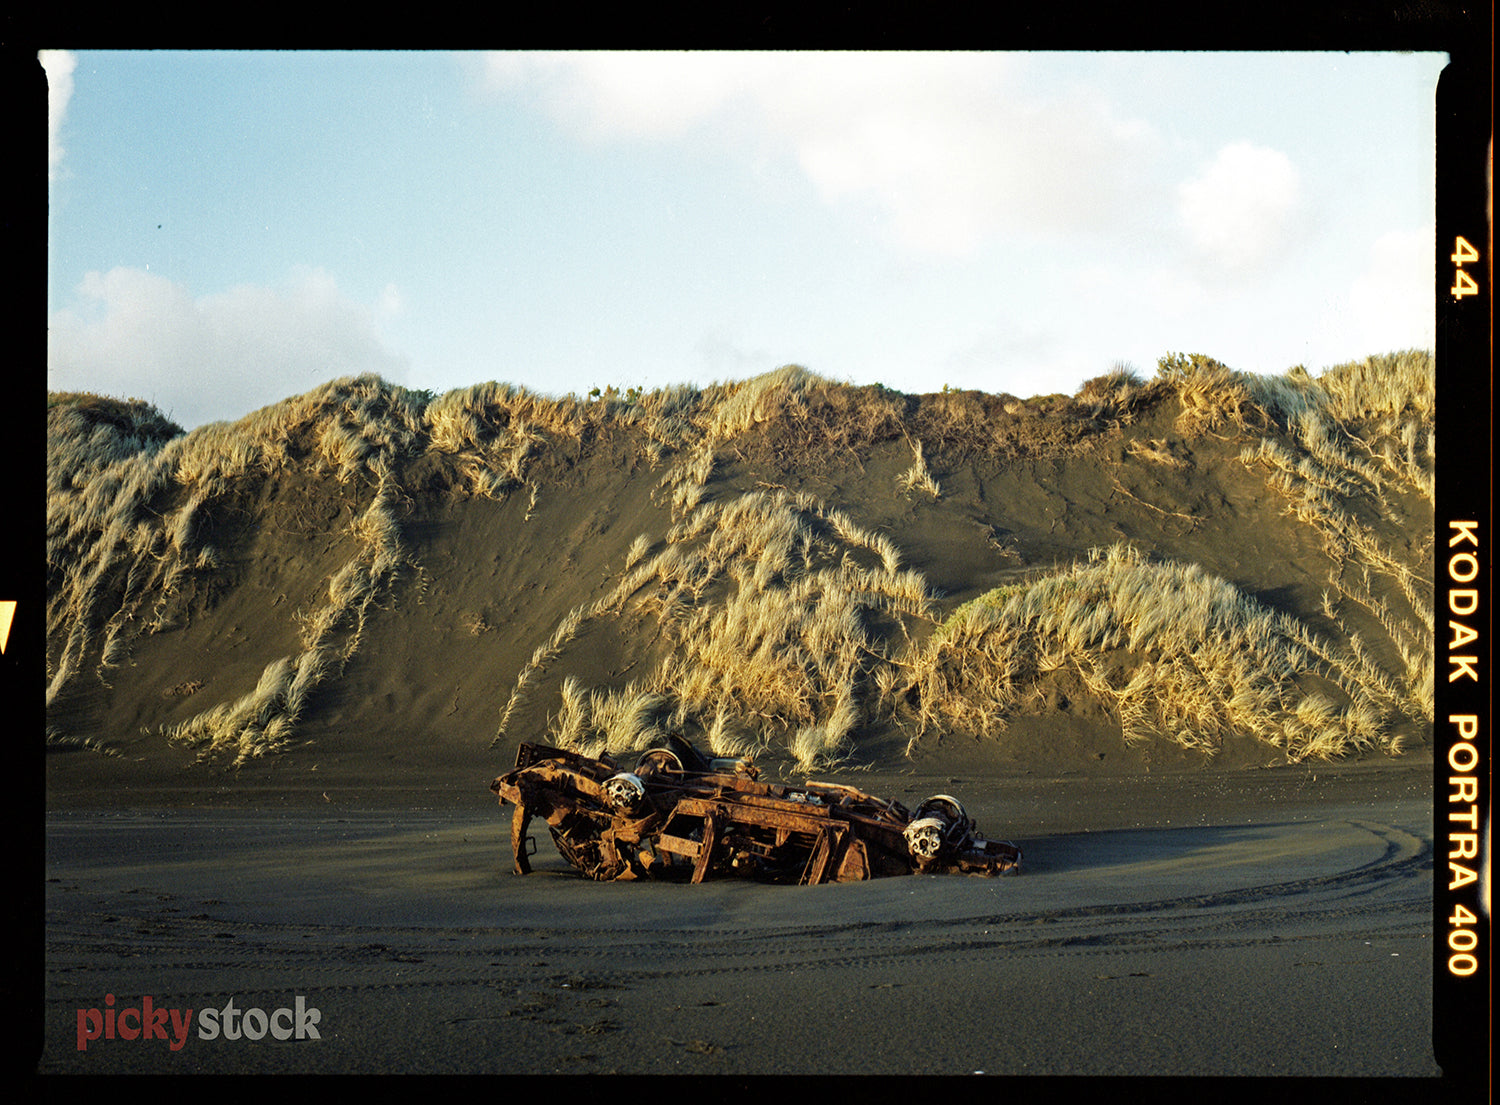 Rusty car wreck on black sand beach cooking back towards sand dunes. 